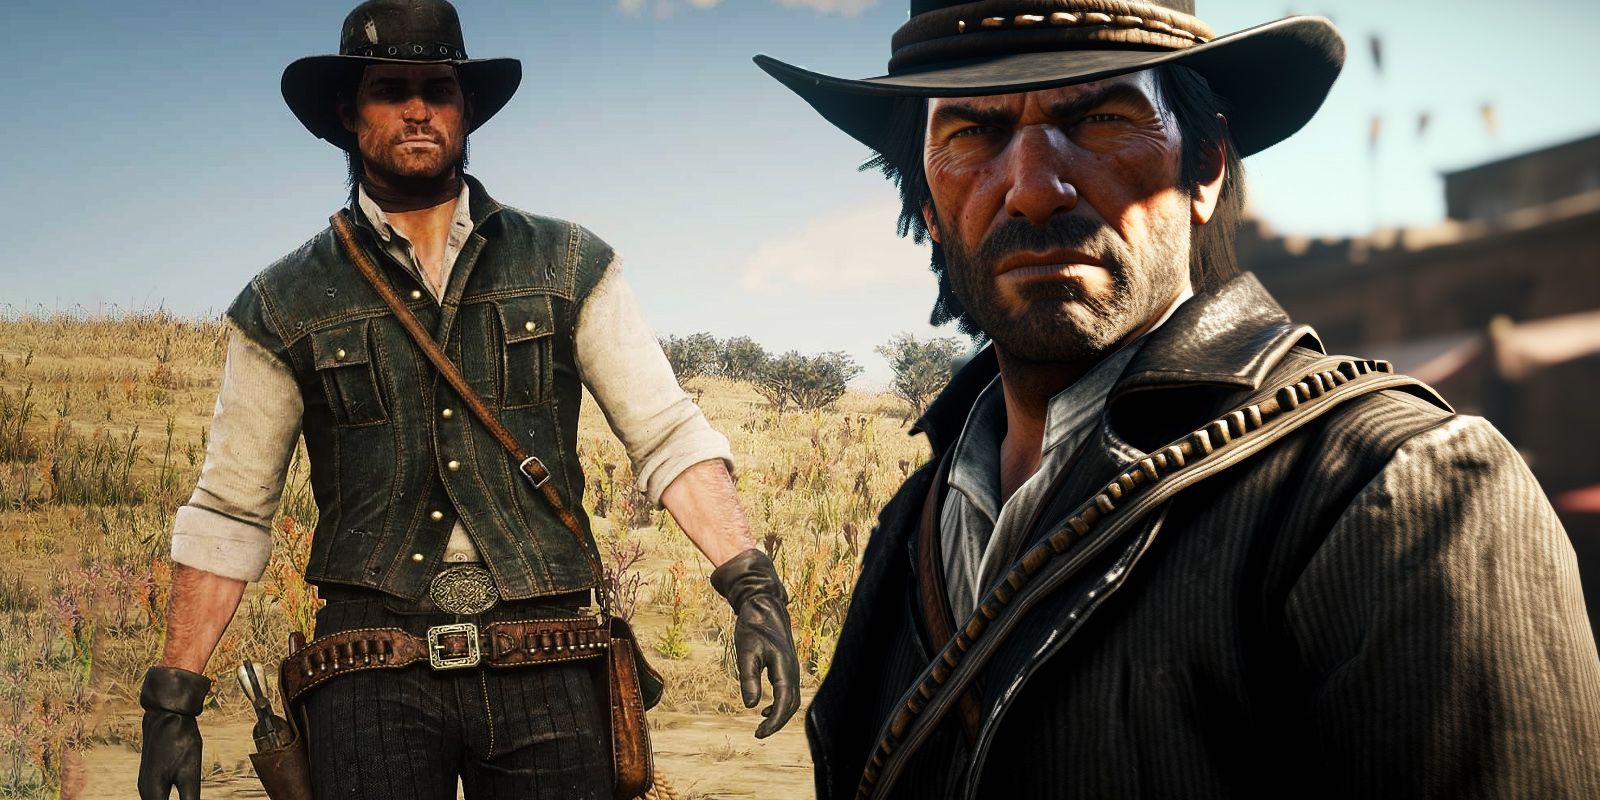 Red Dead Redemption Rumours Point Towards Upcoming Remaster